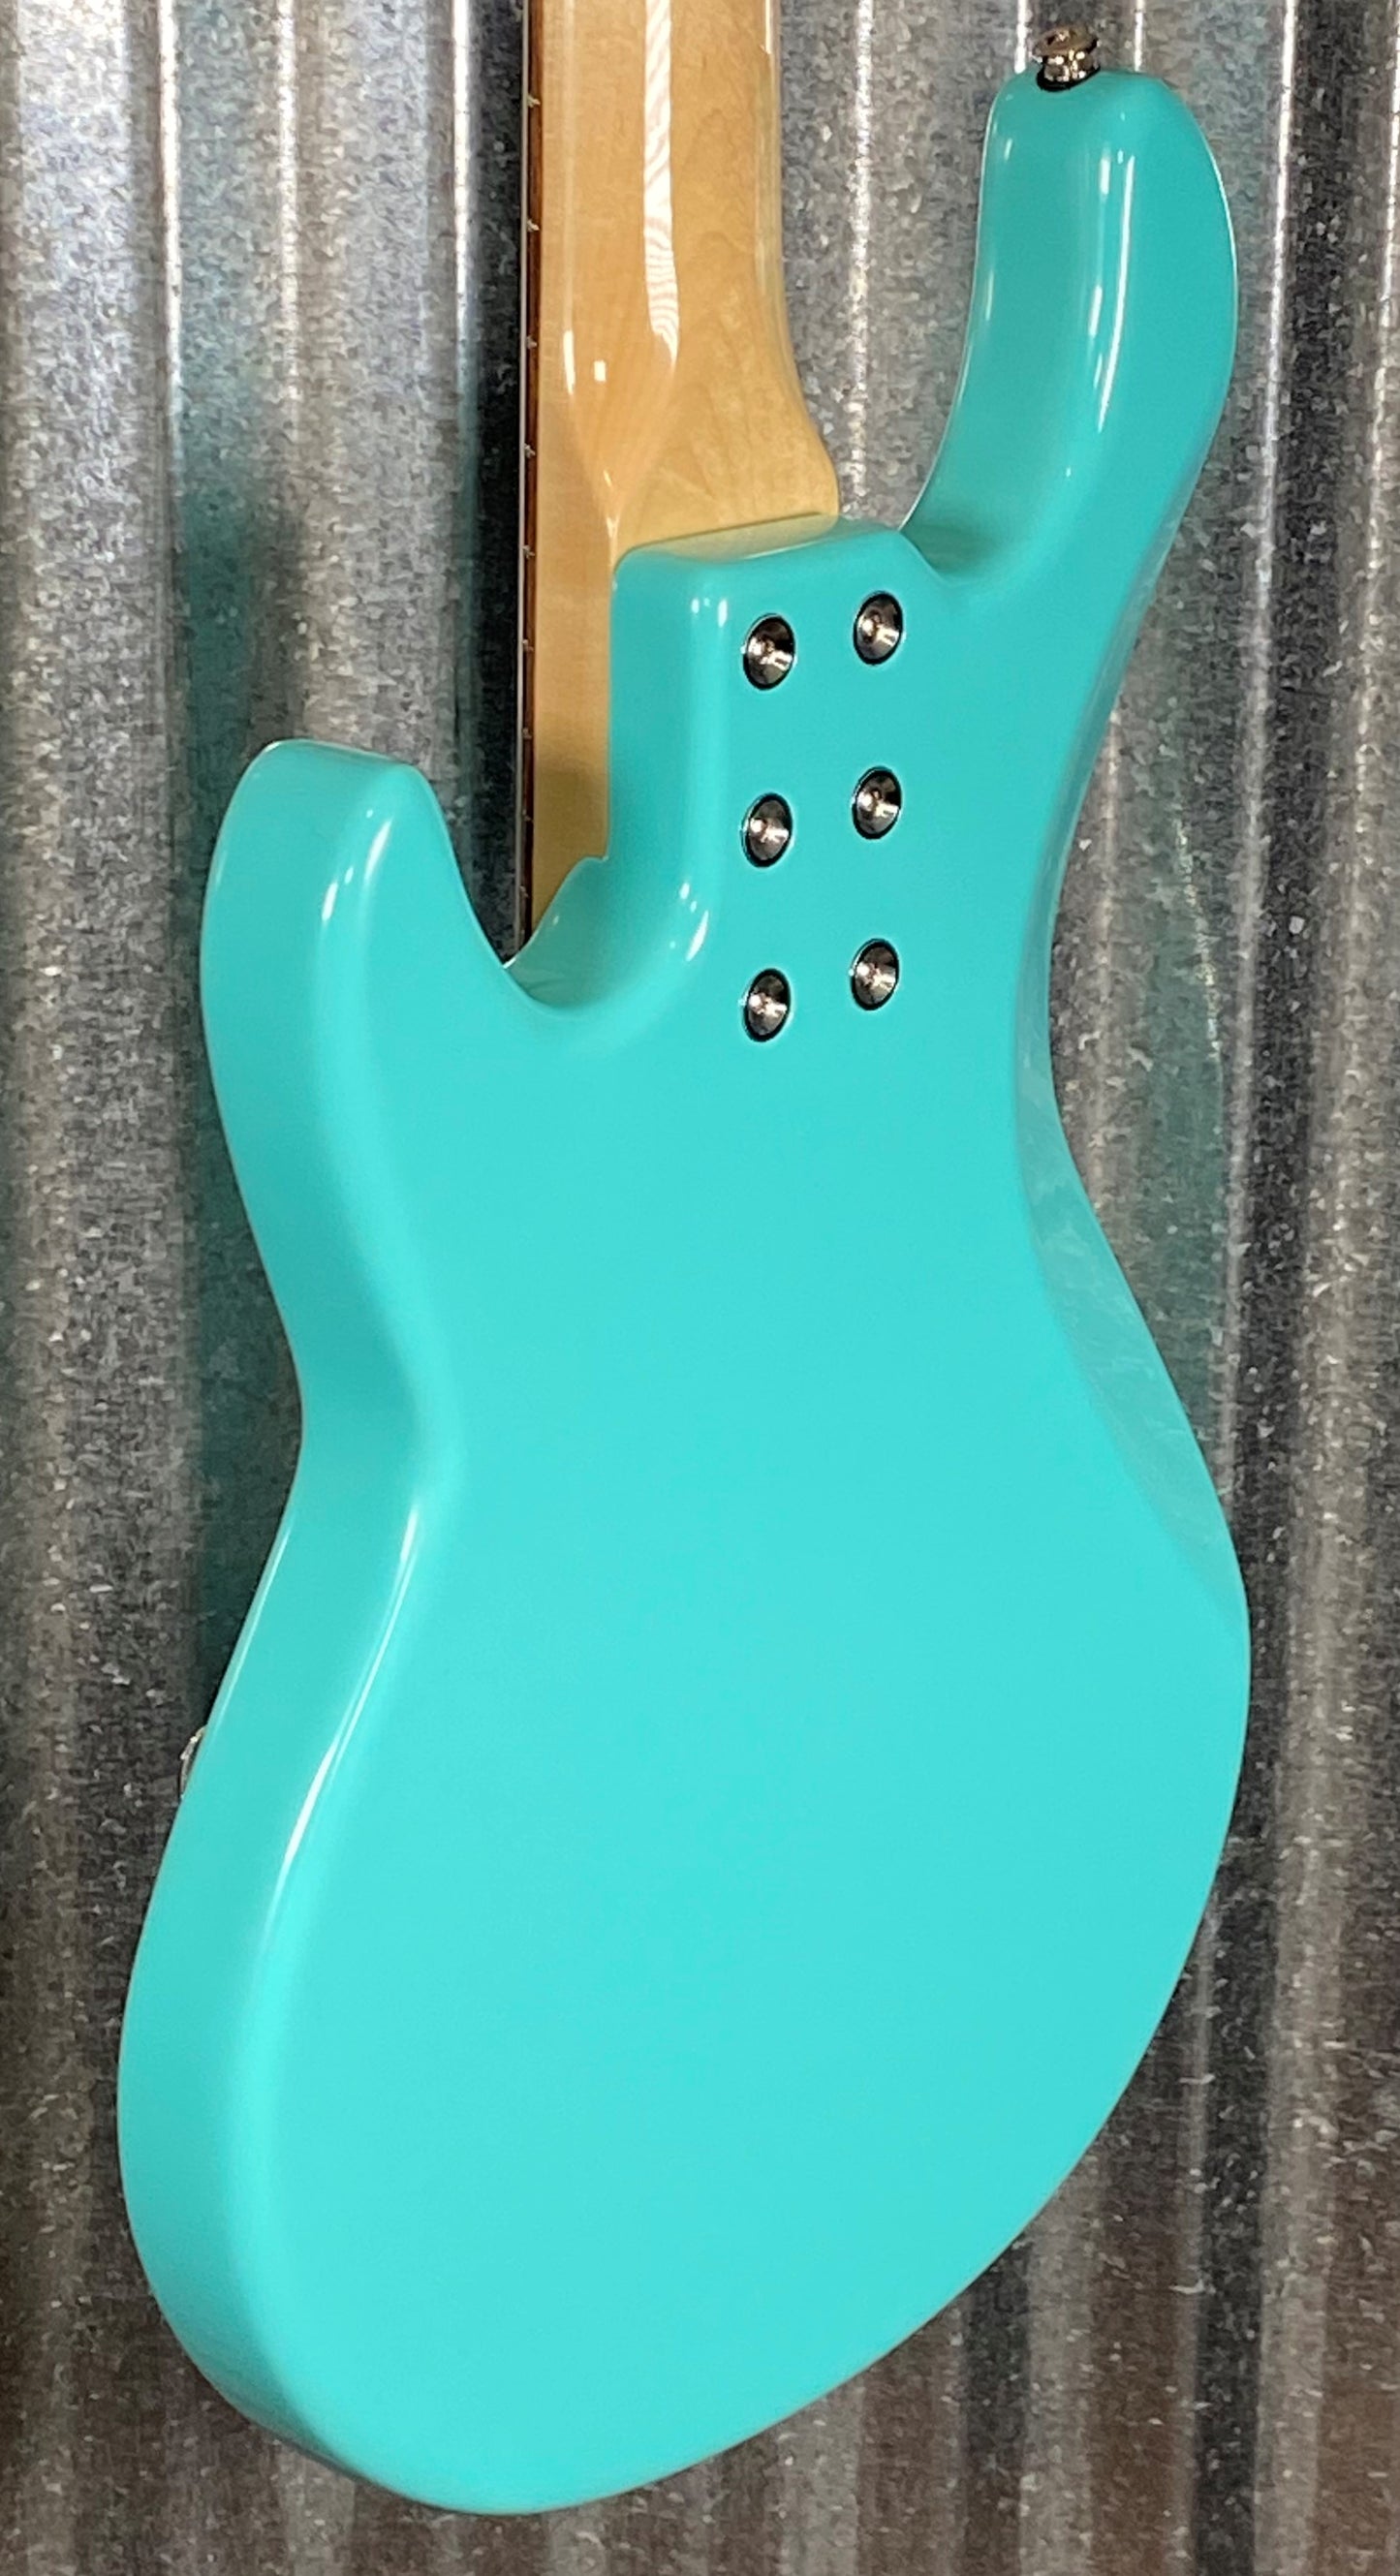 G&L USA L-1000 S750 5 String Turquoise Bass & Case #6478